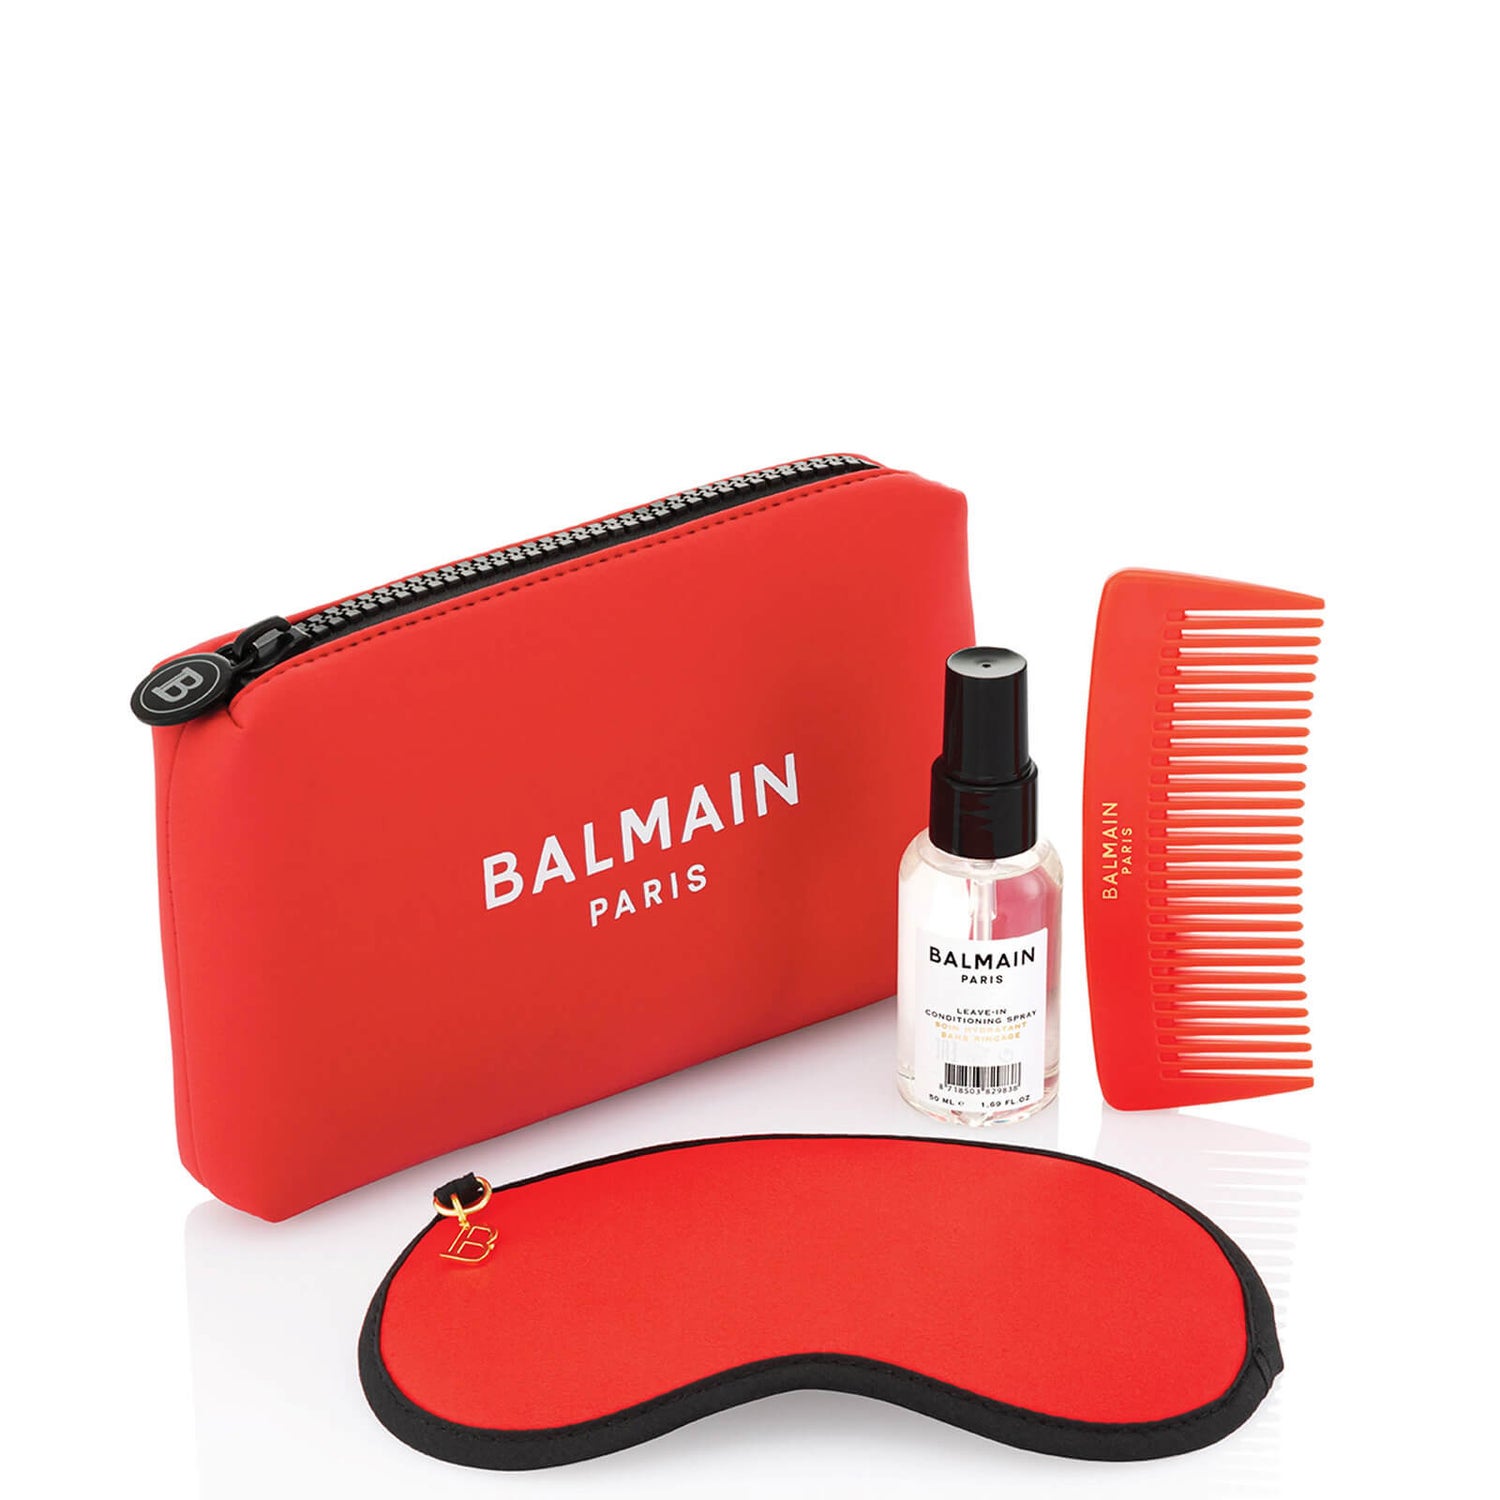 Balmain Limited Edition Cosmetic Bag - Red